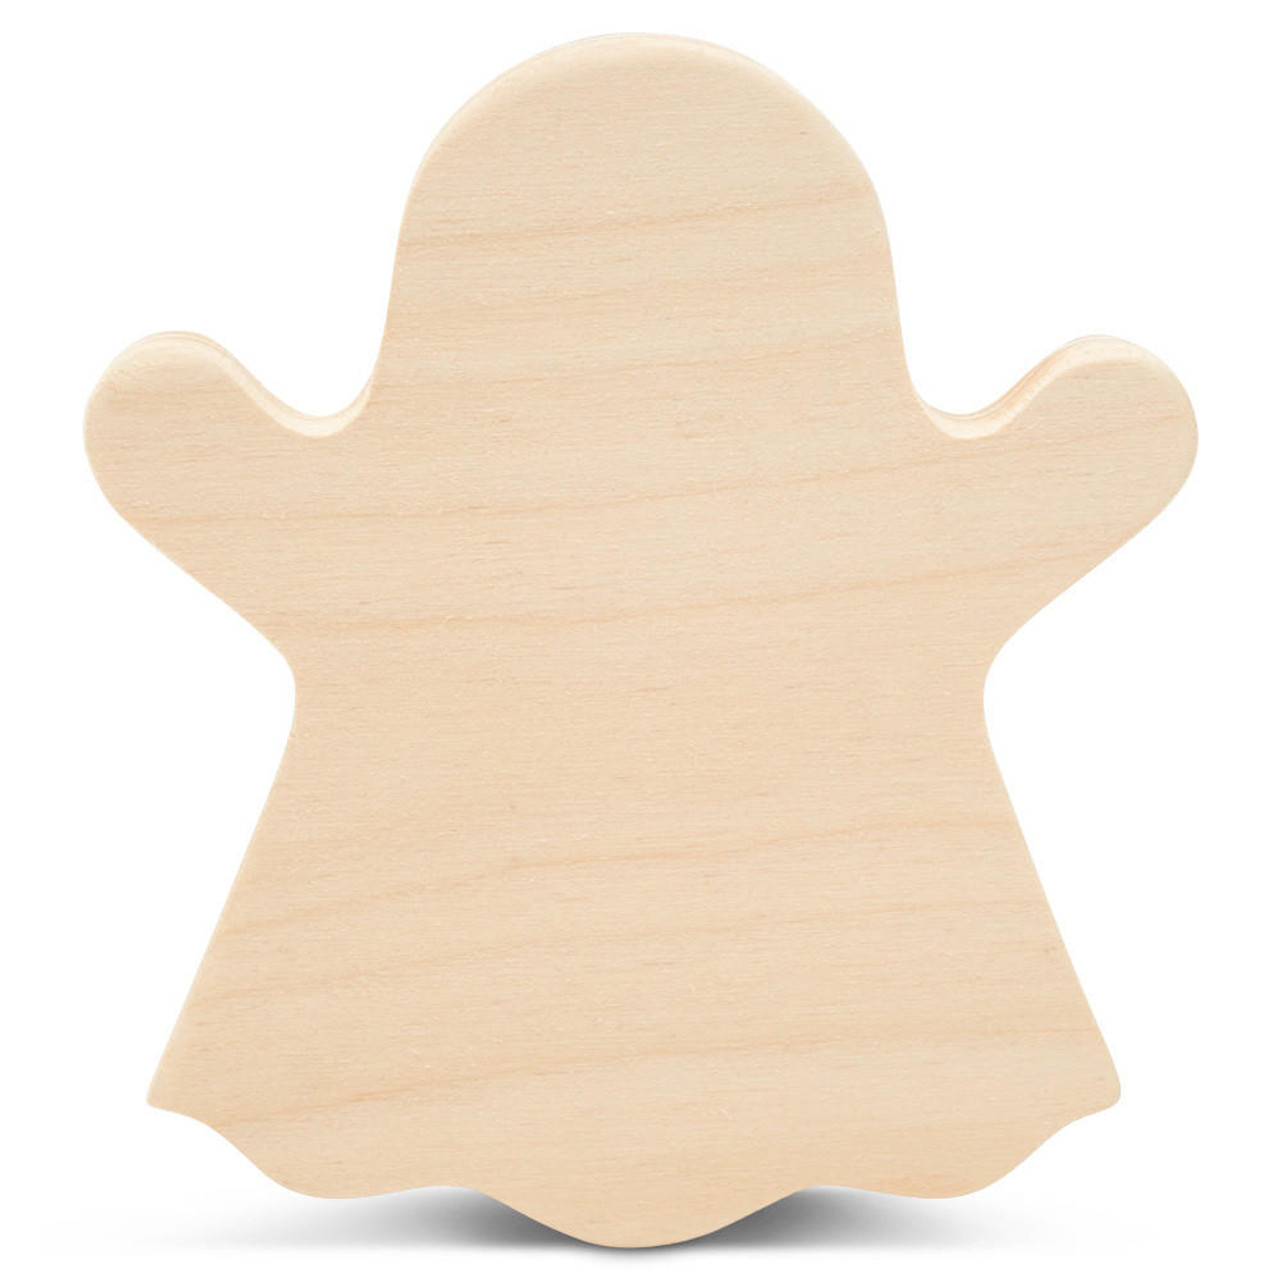 Wood Ghost Cutouts 8 x 7 Inch, Pack of 25 Unfinished Wooden Cutouts for  Crafting, and DIY Halloween Décor, by Woodpeckers